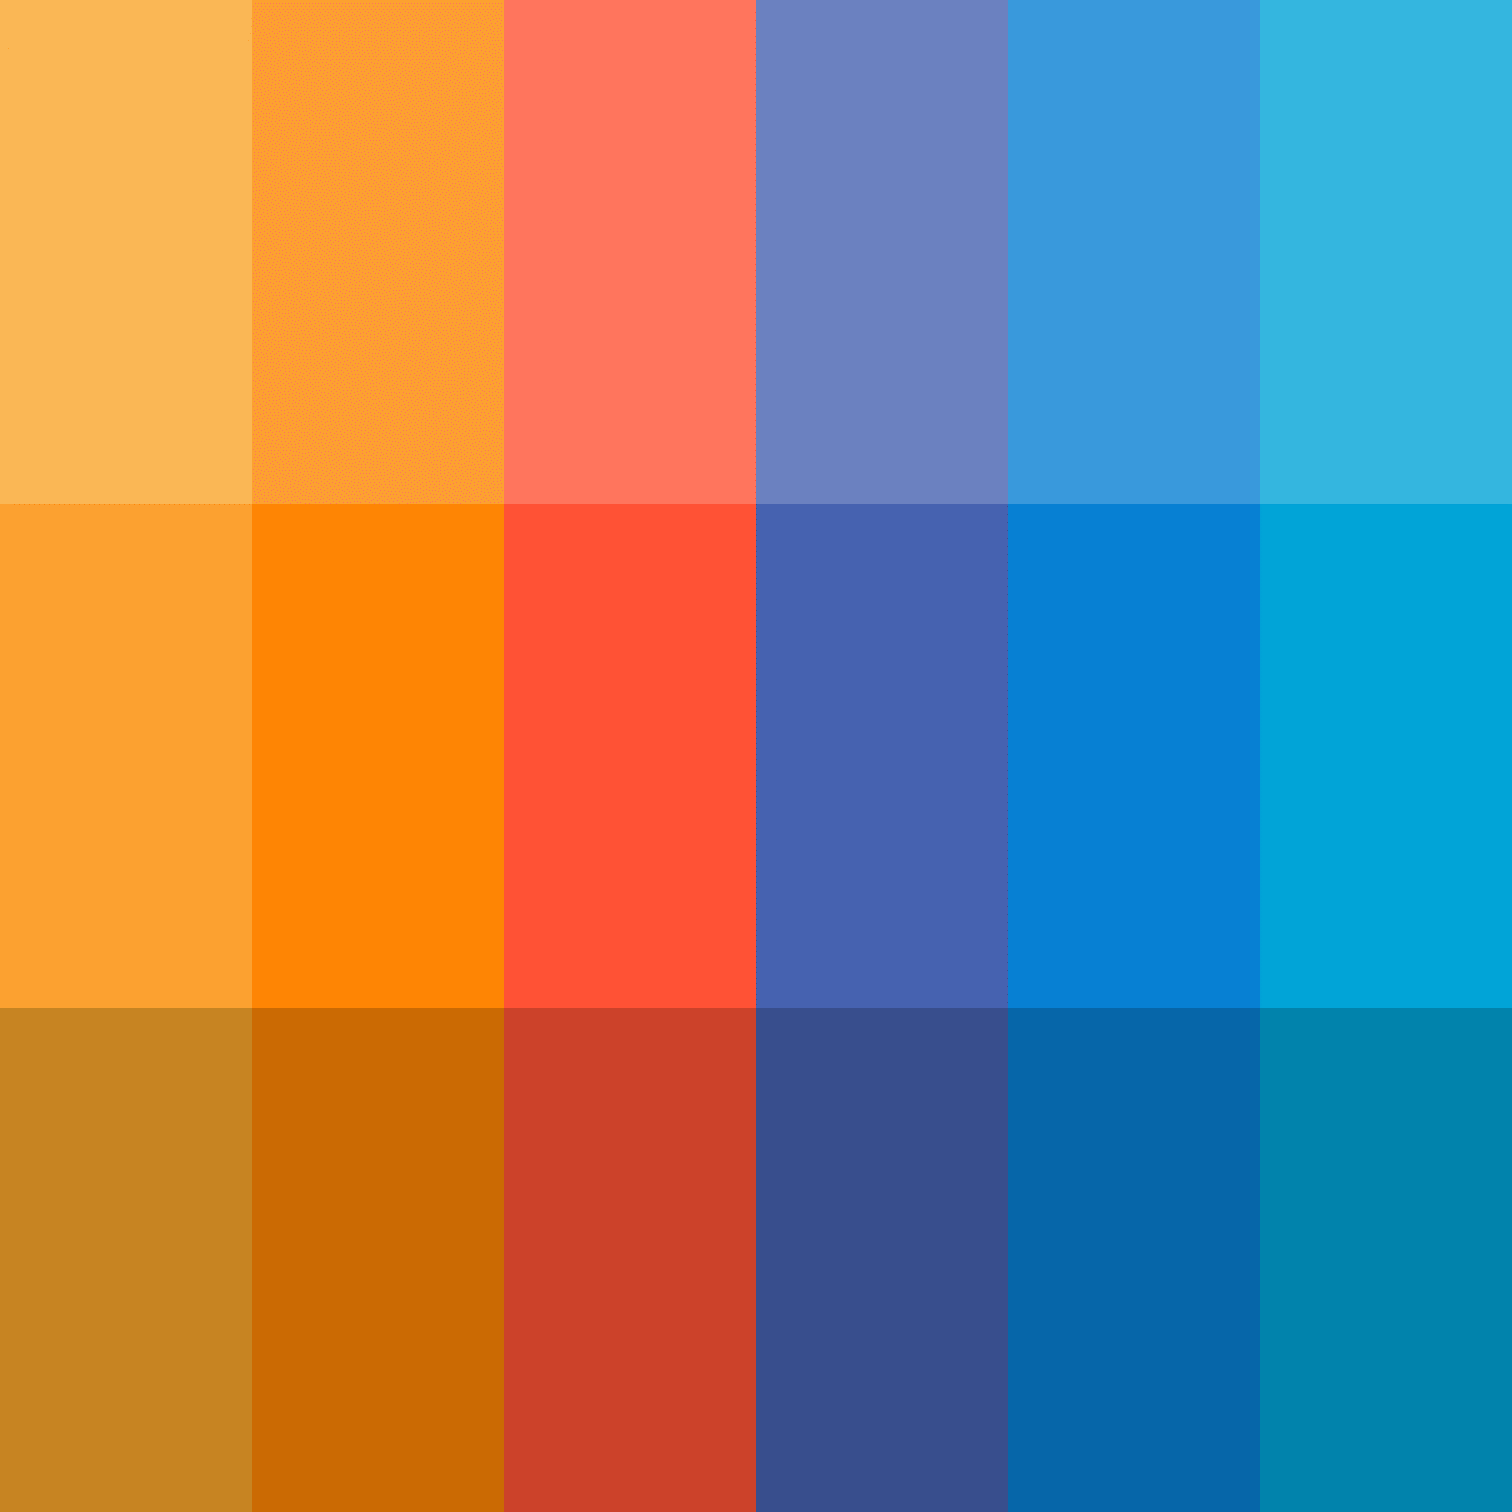 Color Palette Template Photoshop .PSD by Vladimir Carrer on Dribbble